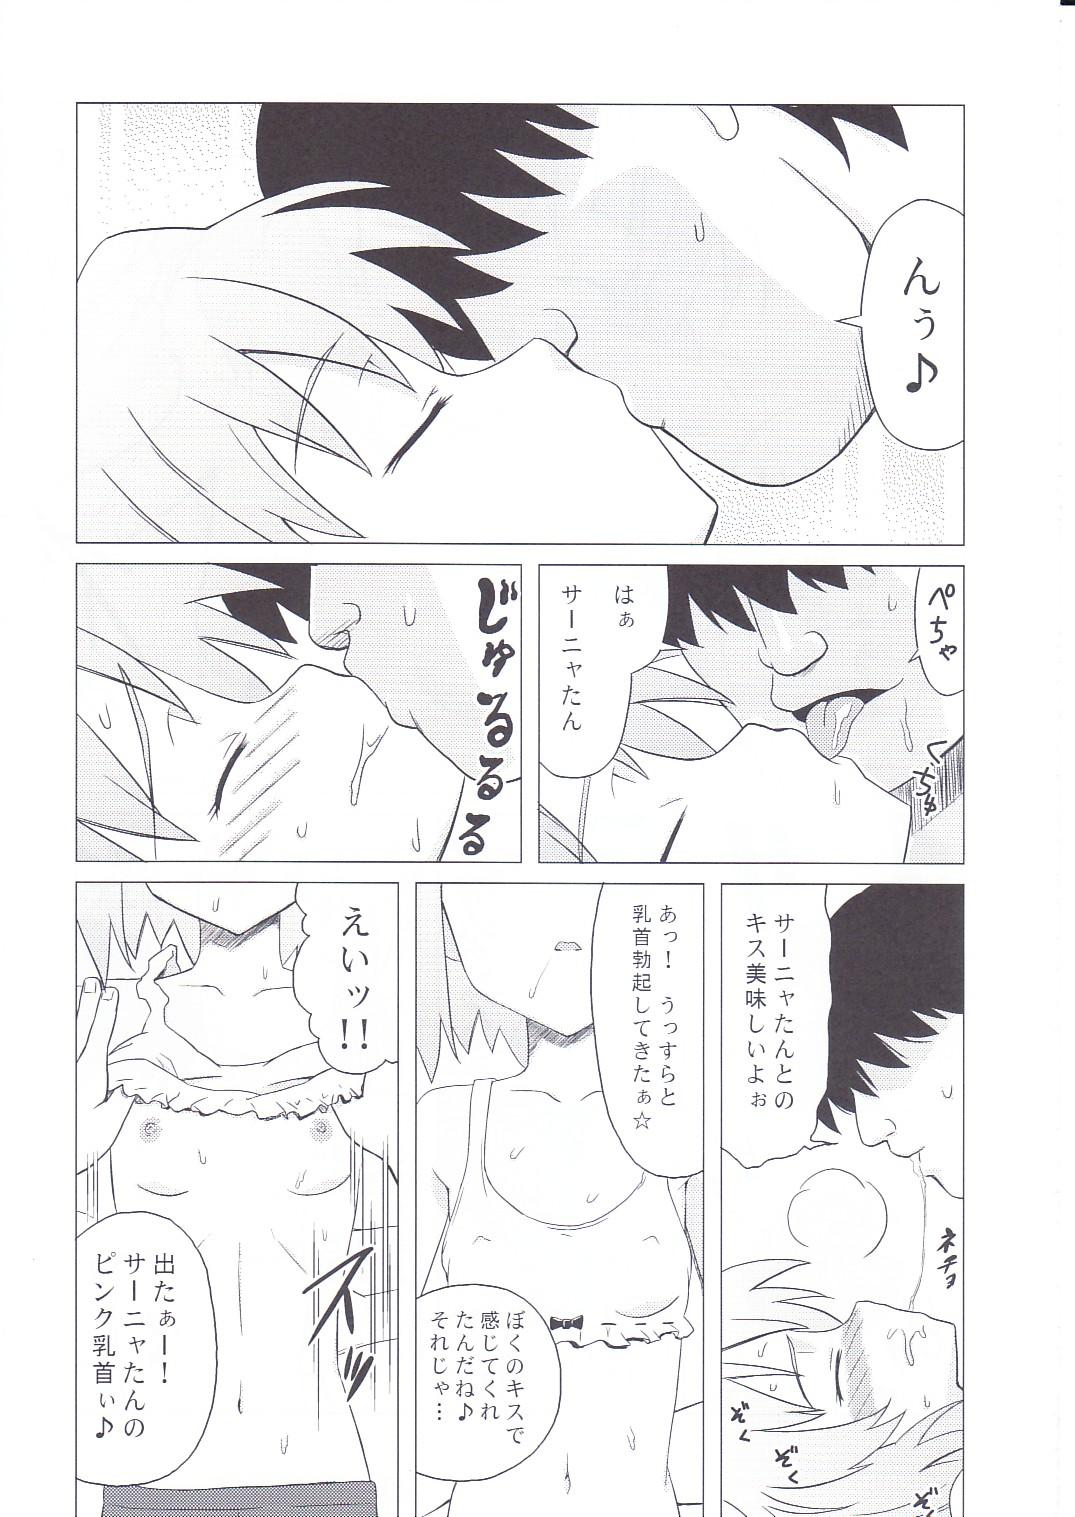 Sloppy Blowjob Sleeping witches - Strike witches Secret - Page 6